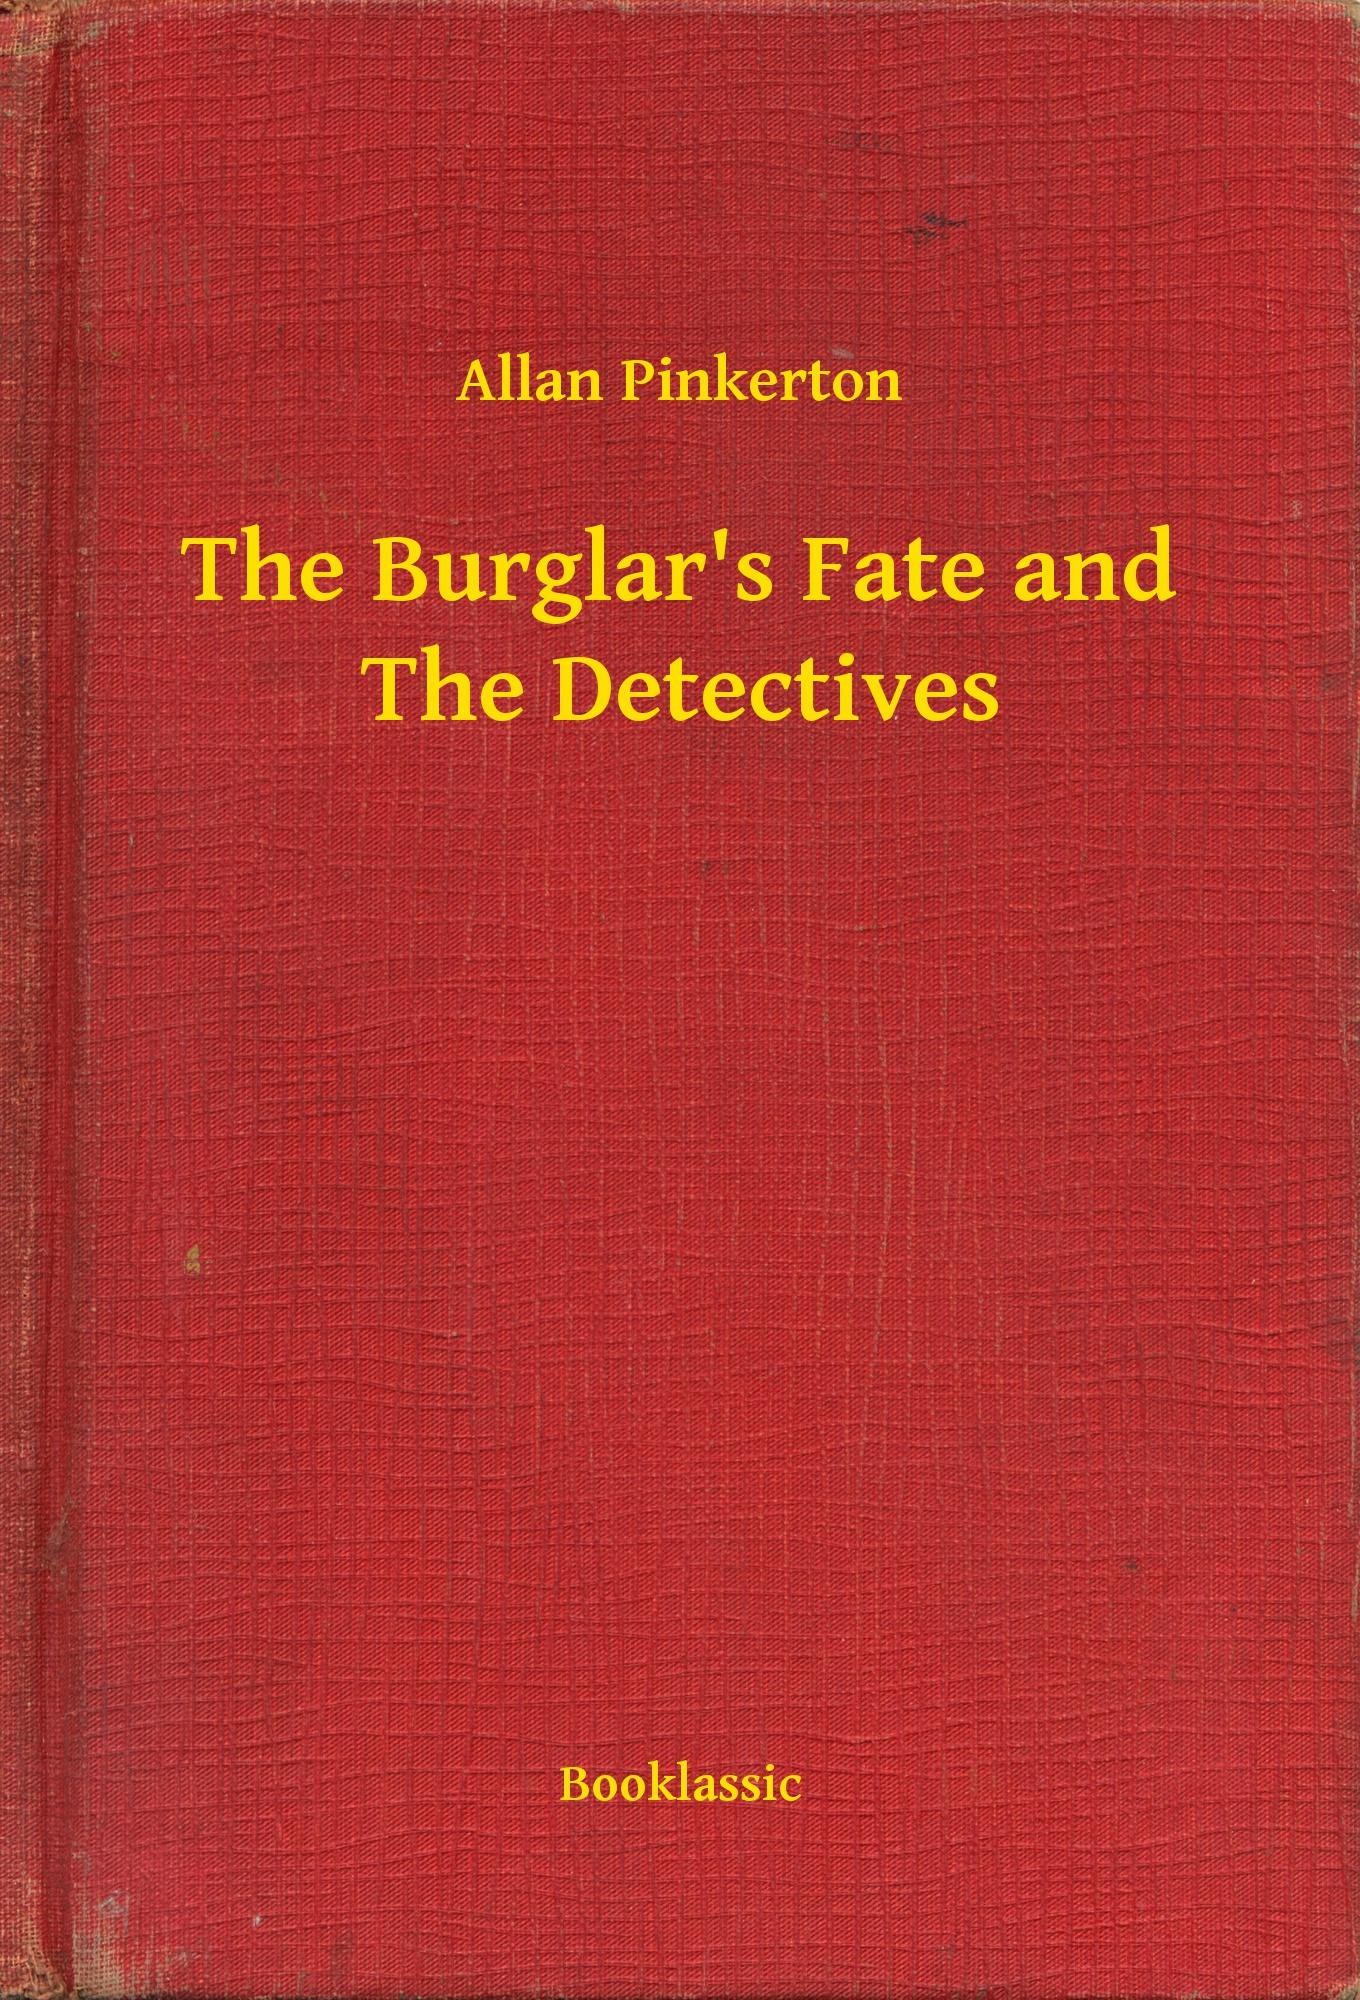 The Burglar's Fate and The Detectives - Allan Pinkerton